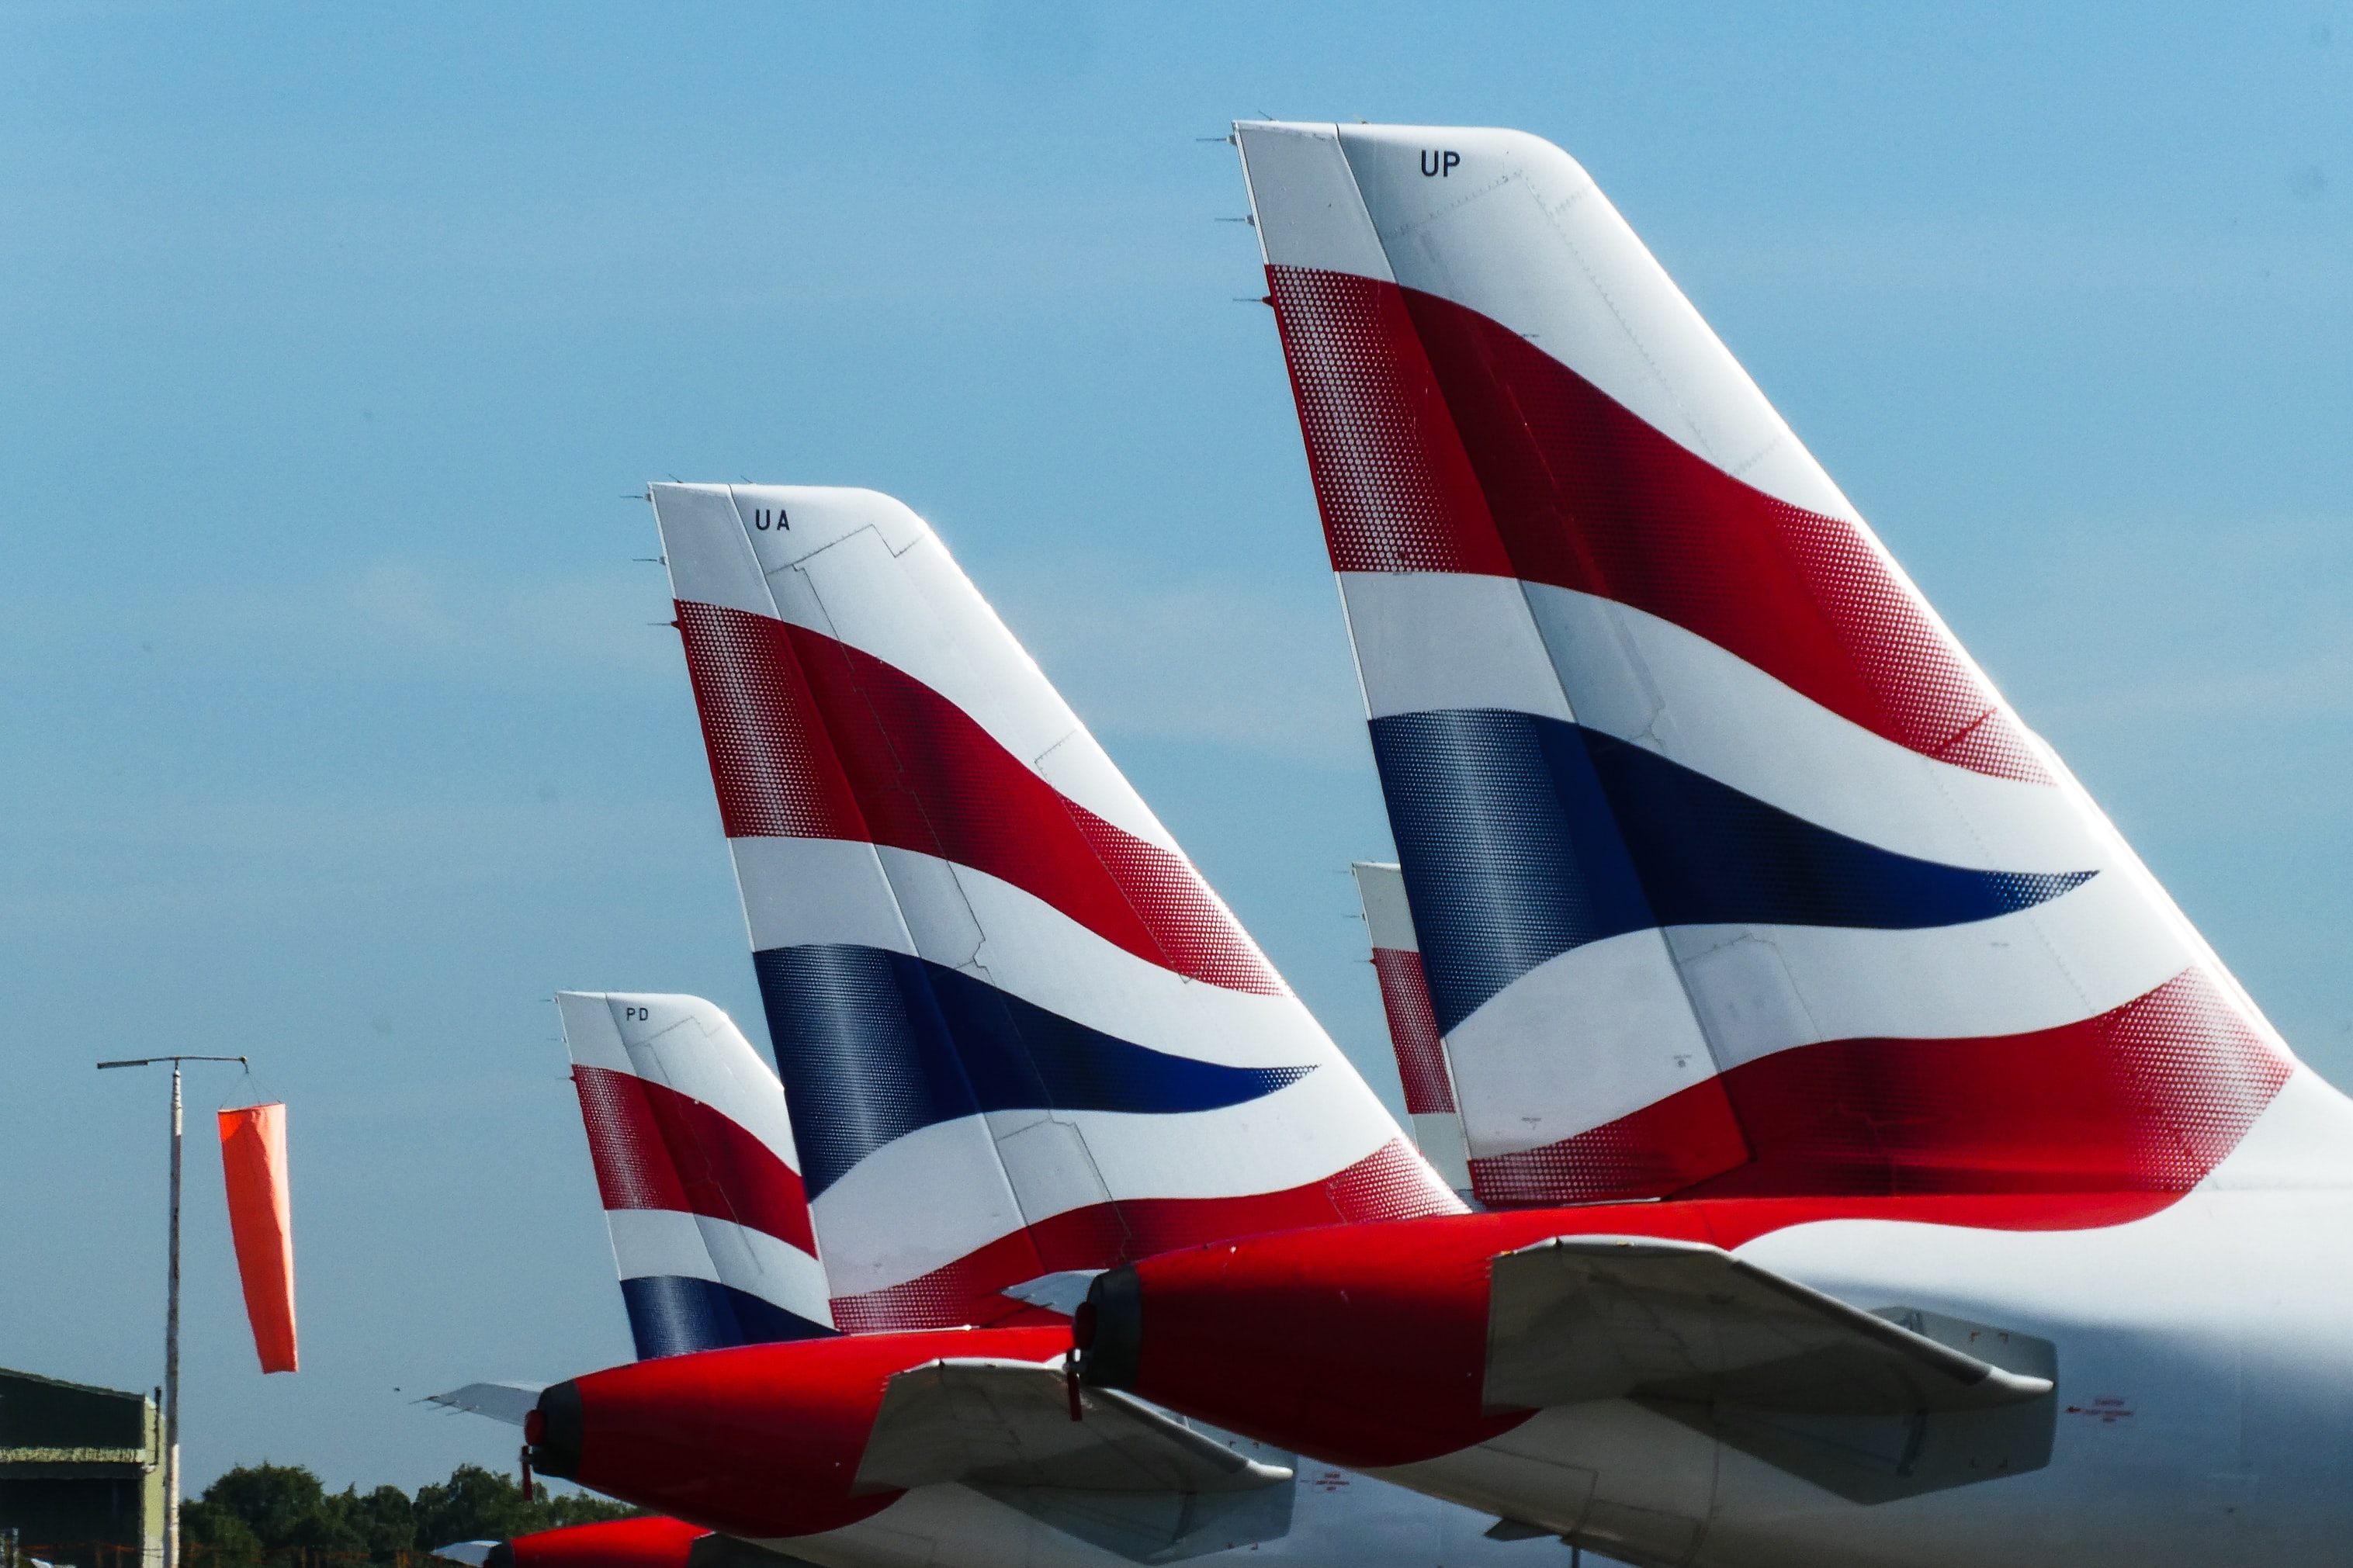 The flexible 'Book with Confidence' policy of British Airways has been discontinued.